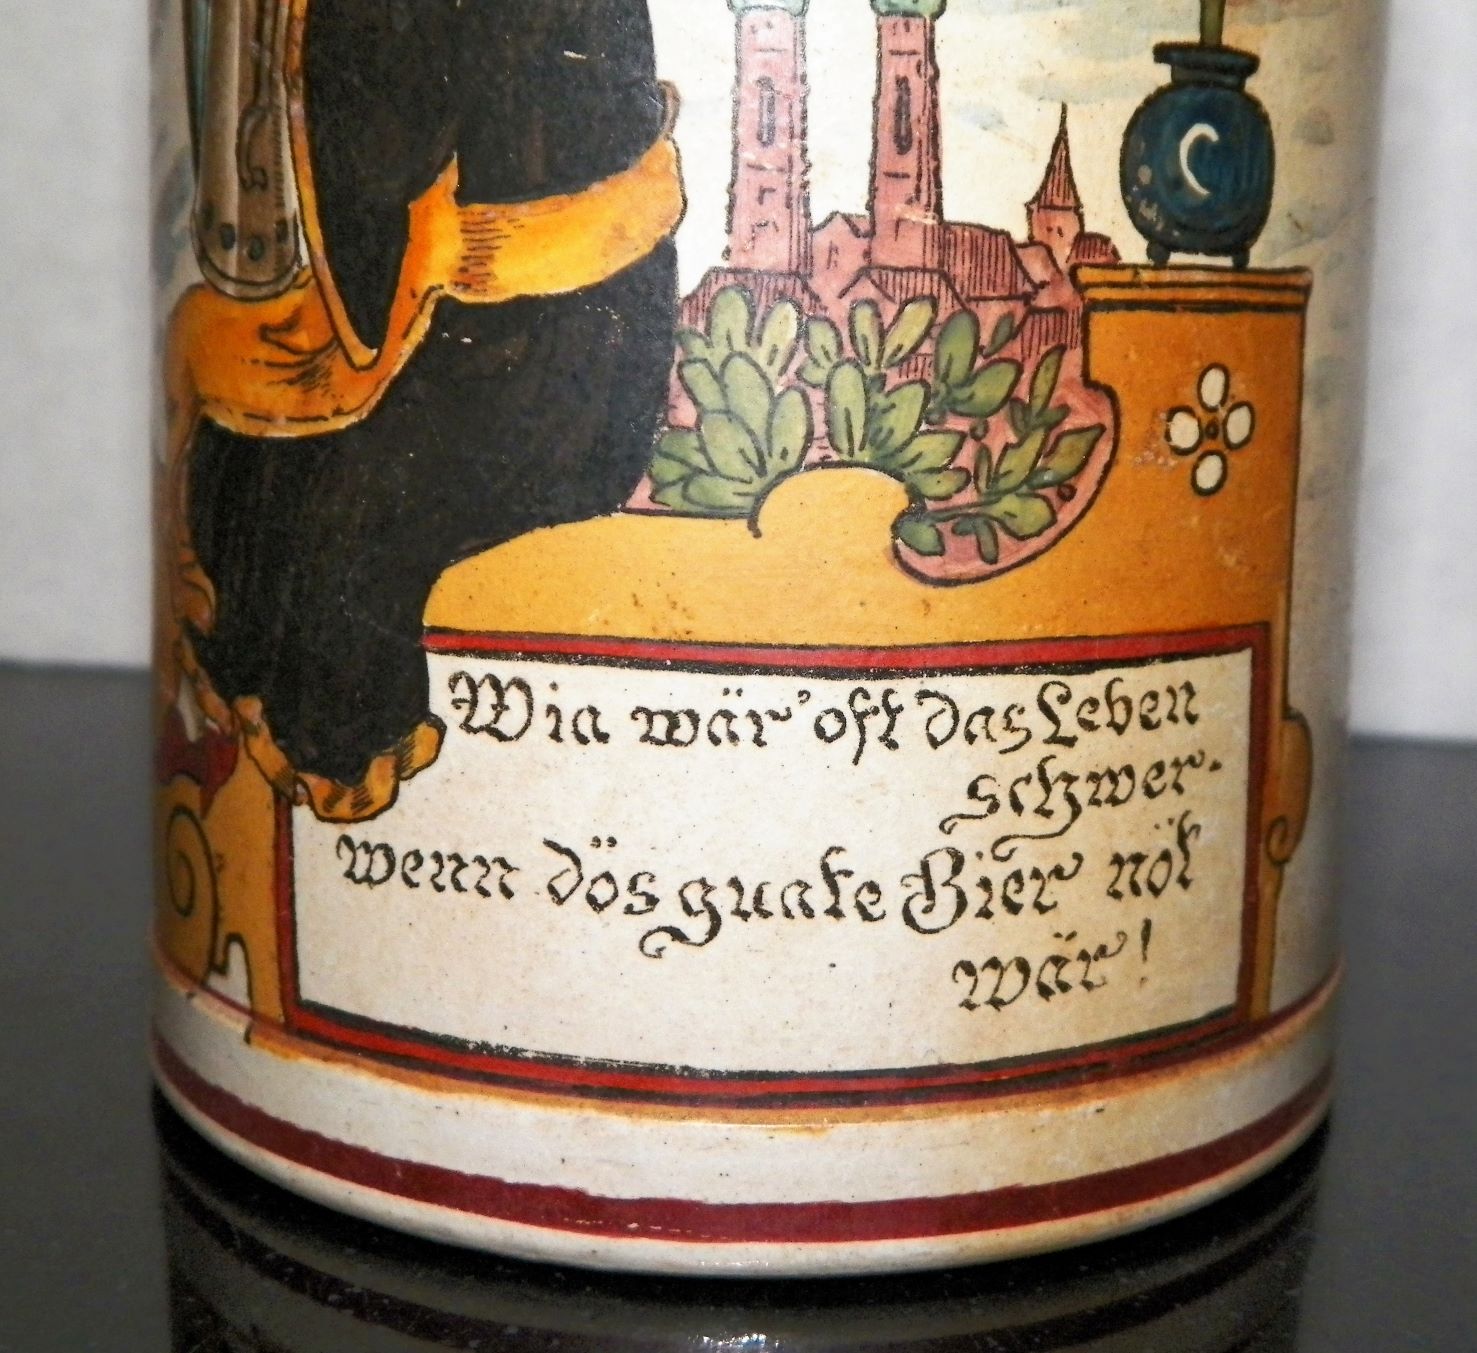 collectible stein BEER STEIN SMALL 1AAA.JPG